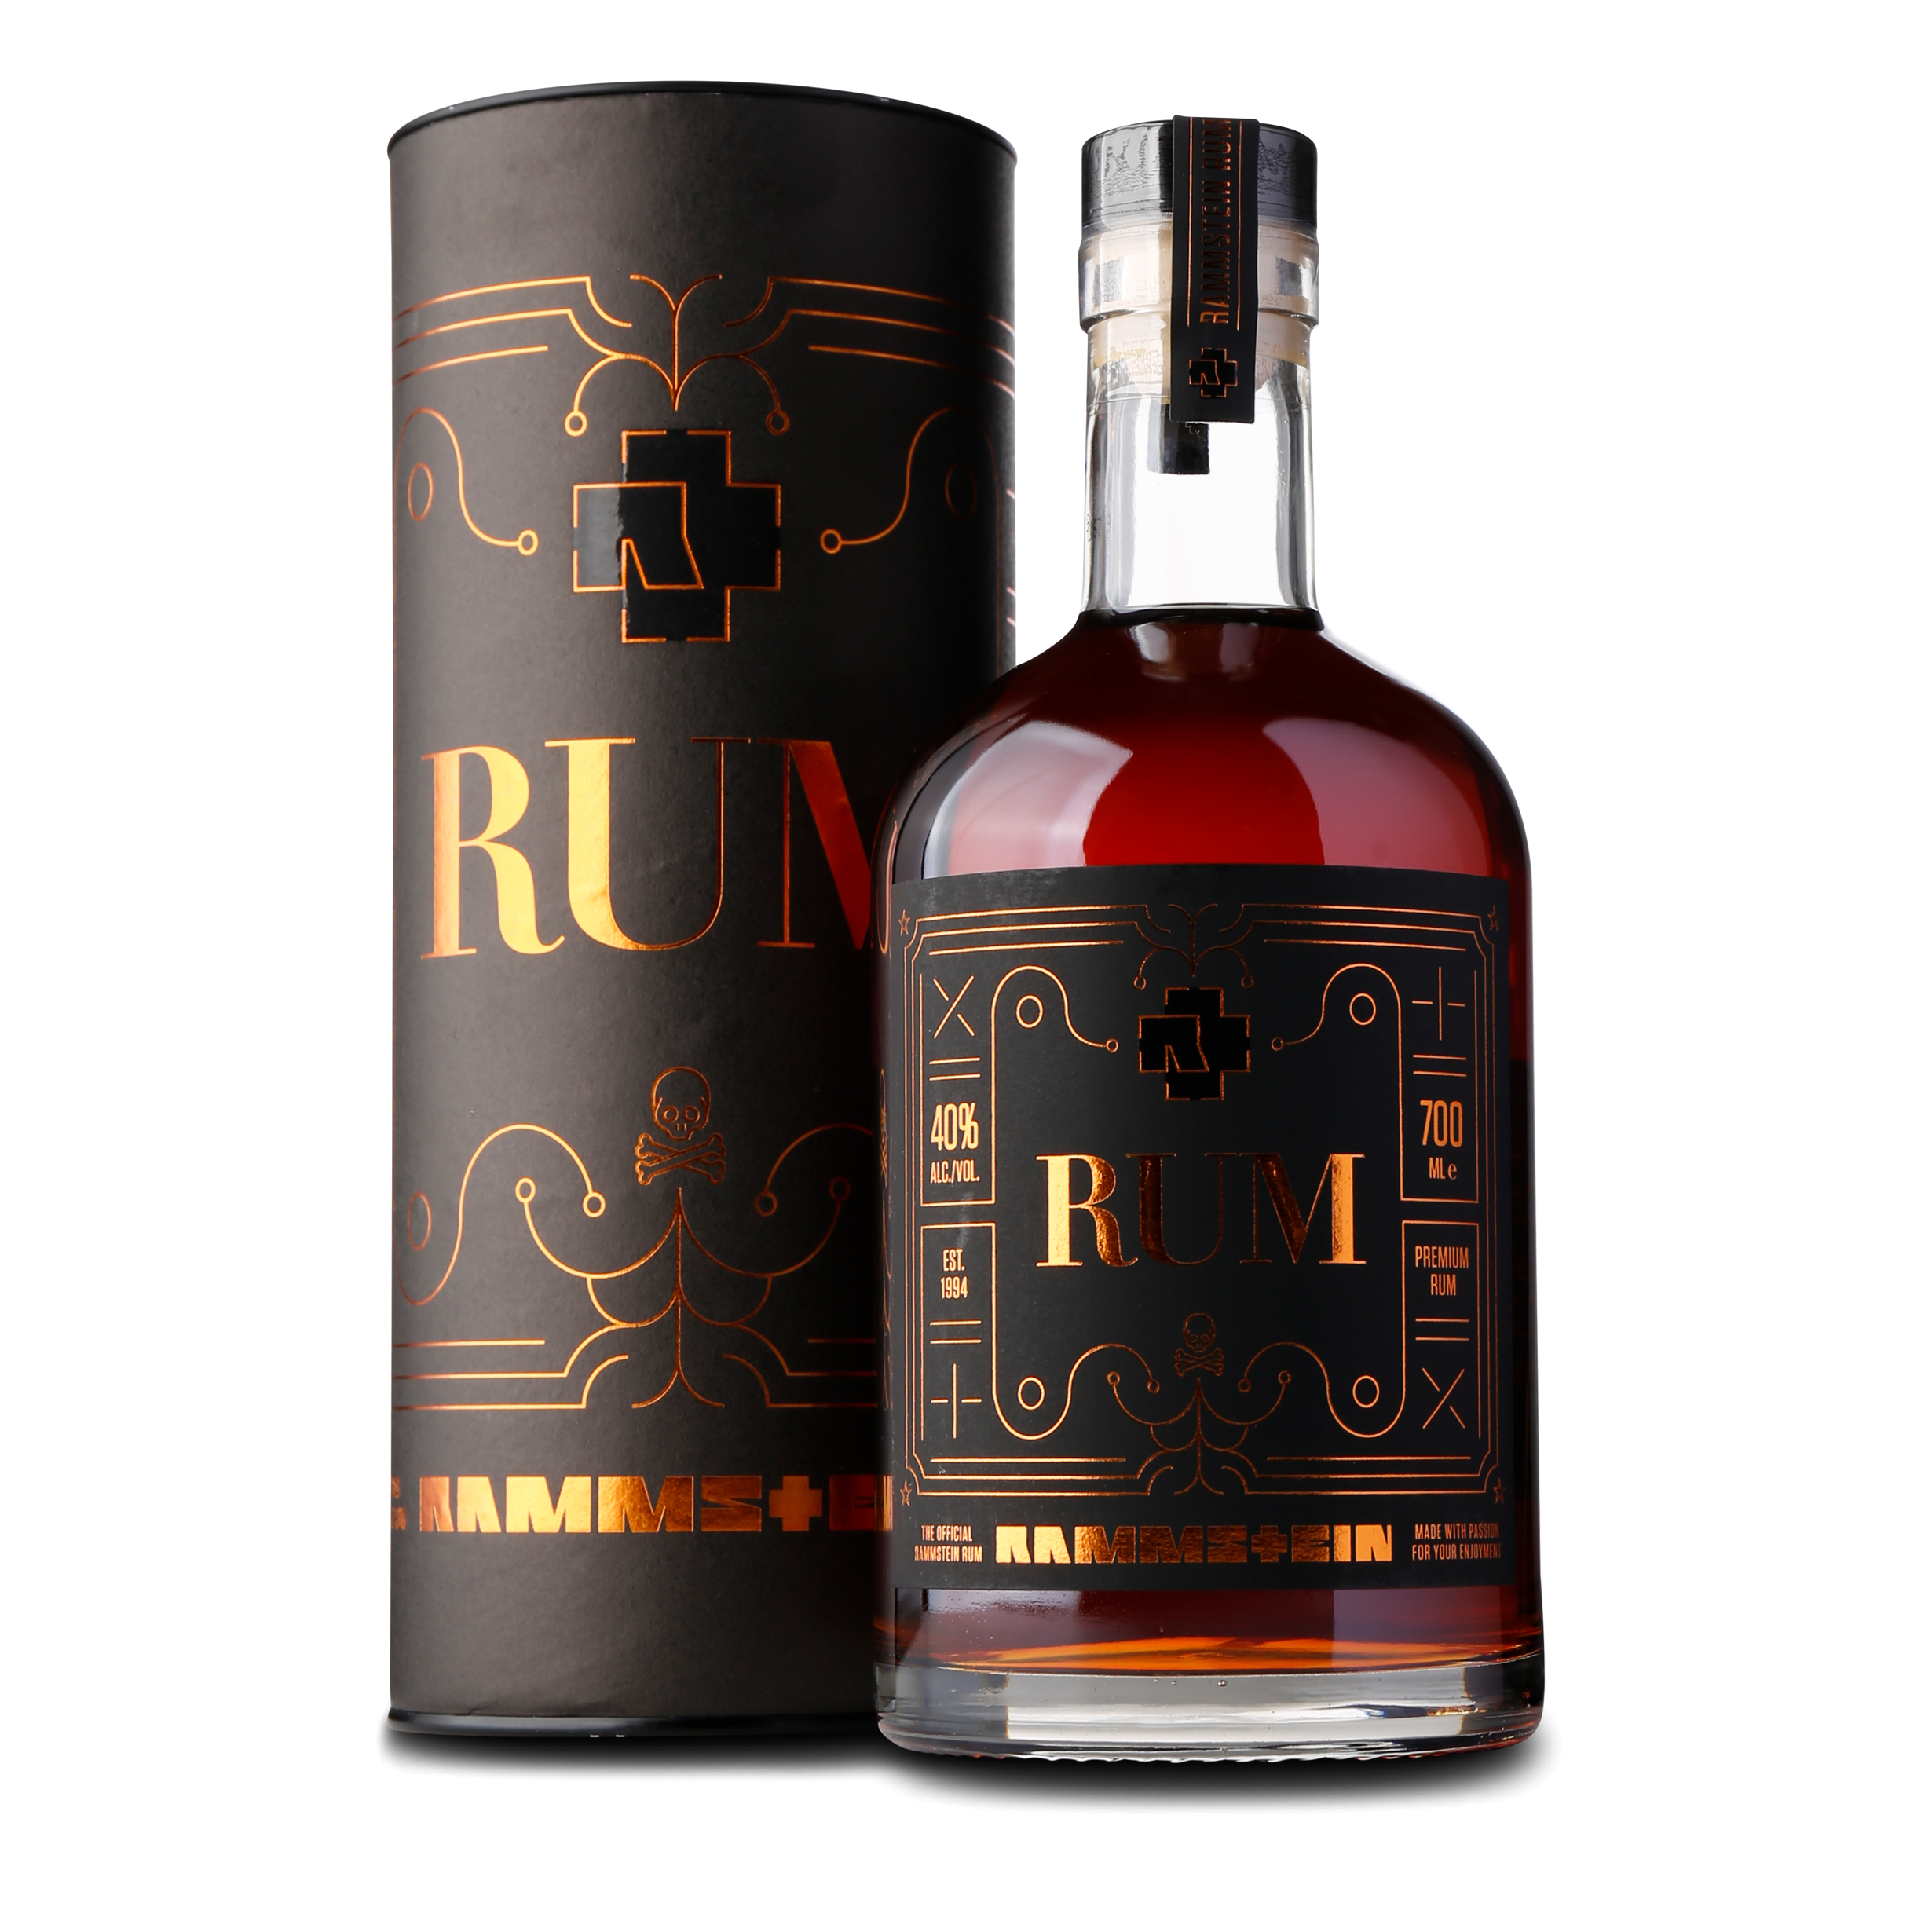 Rammstein Rum Islay Whisky Cask Finish Limited Edition Blended Rum 46%